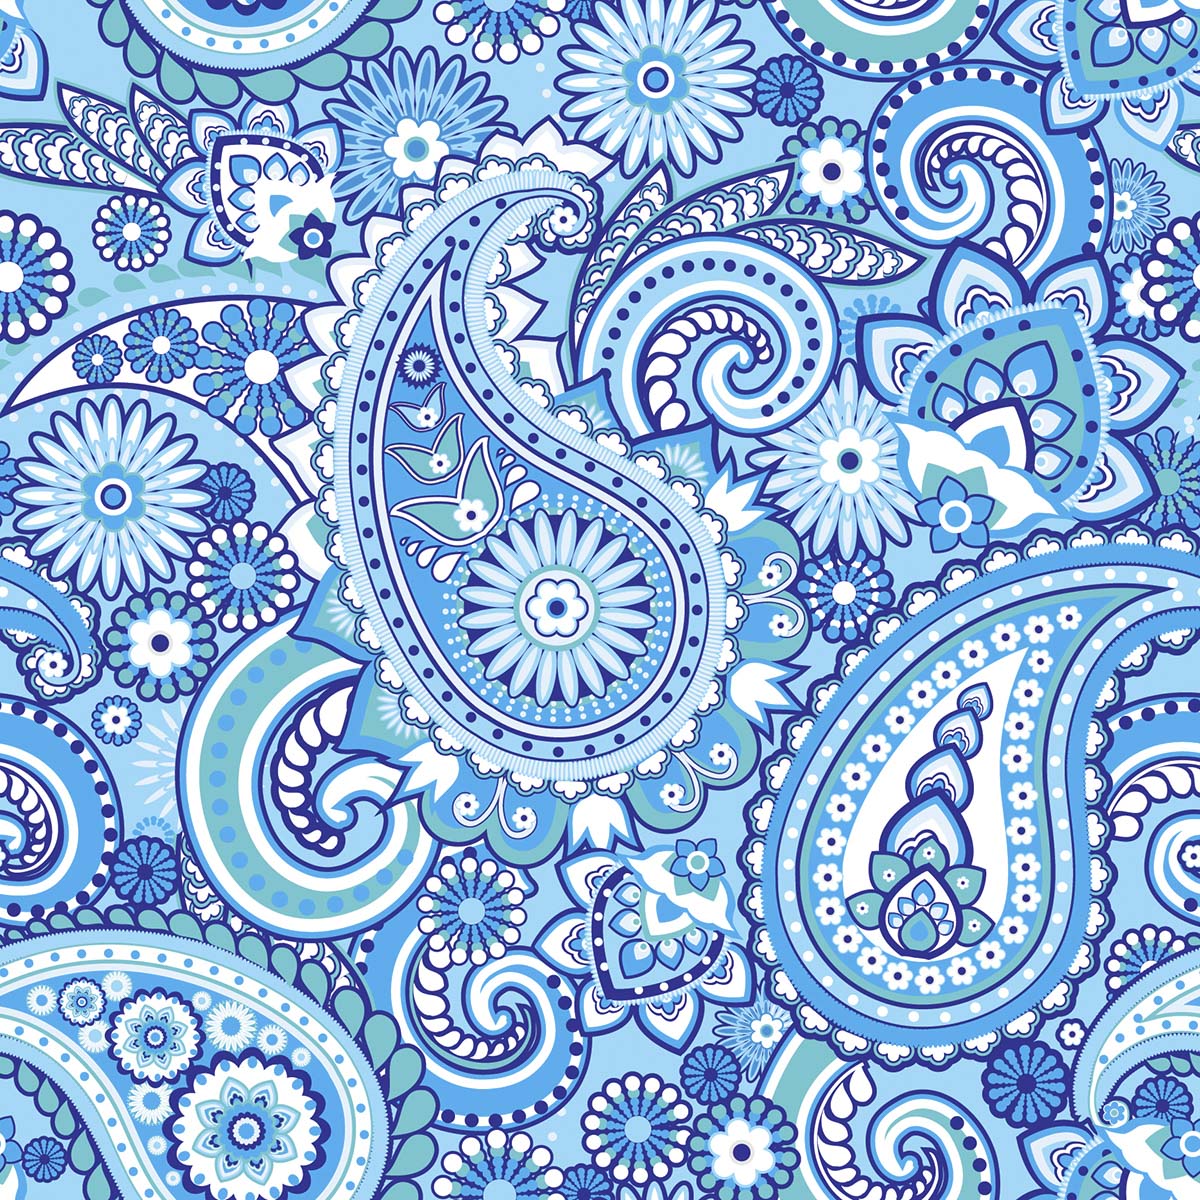 A blue and white paisley pattern